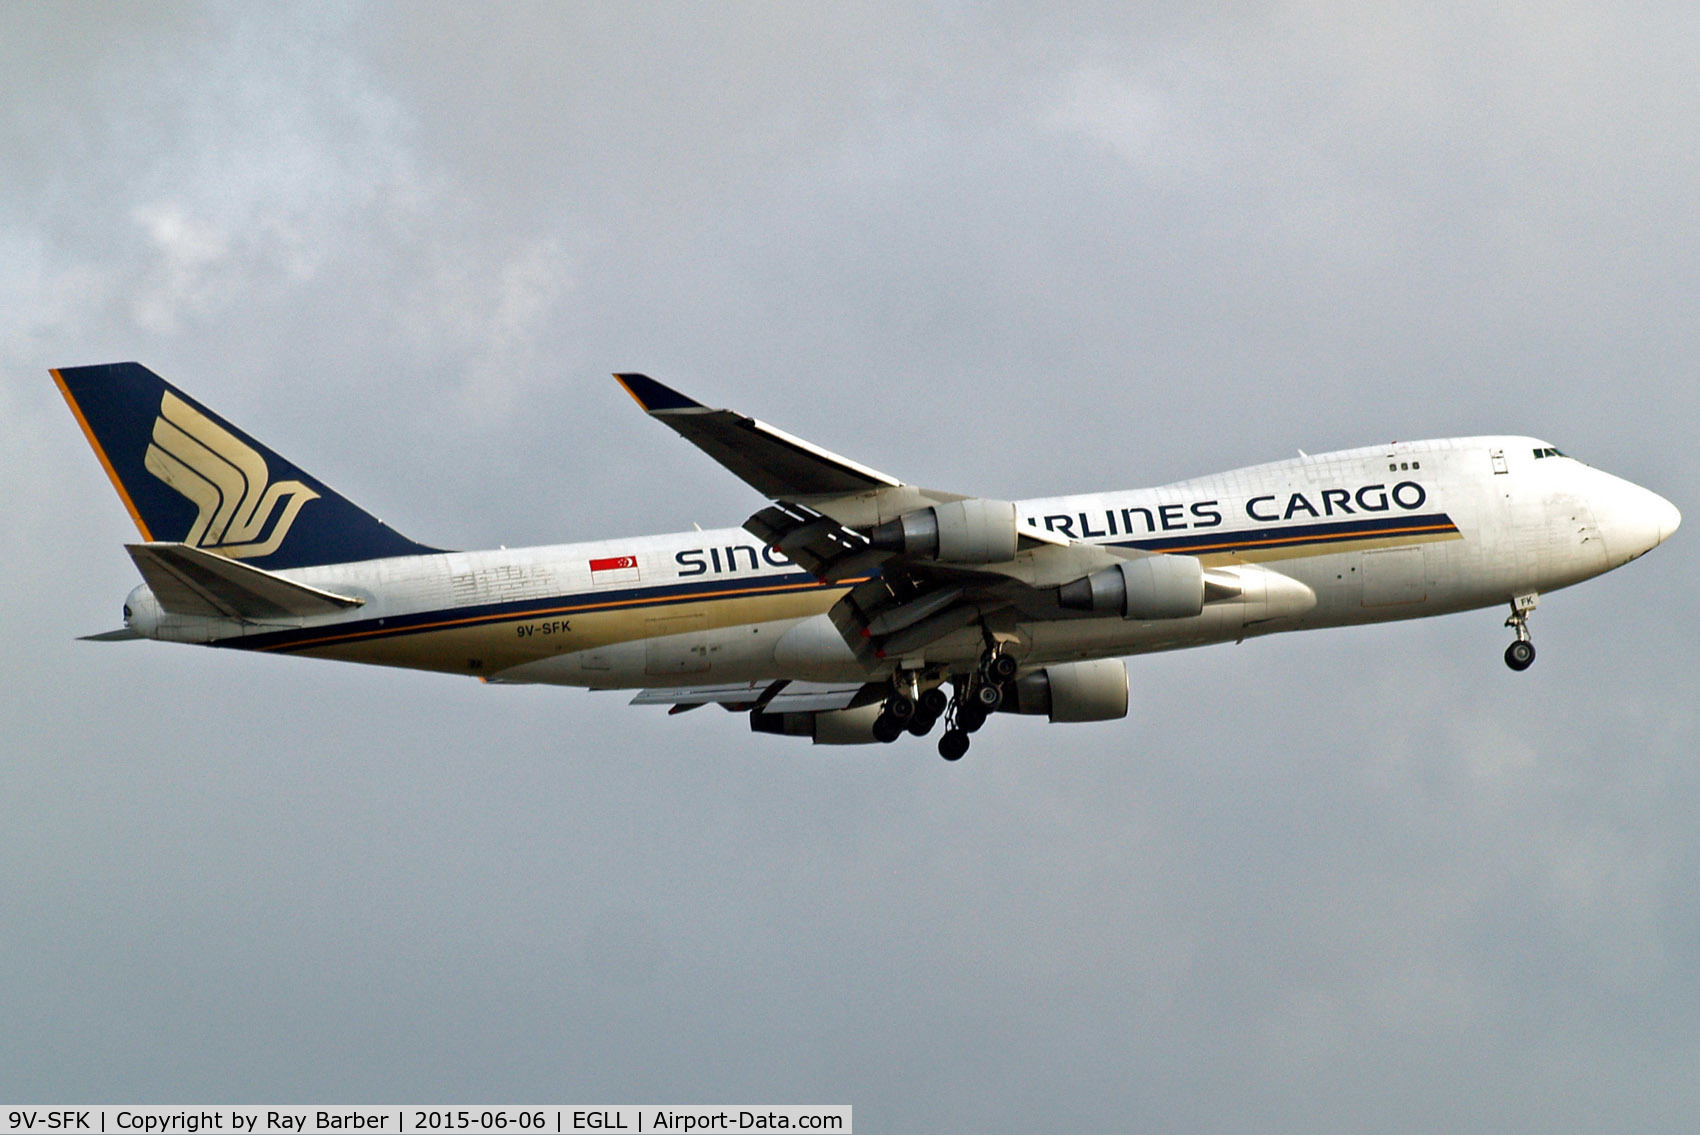 9V-SFK, 1997 Boeing 747-412F/SCD C/N 28023, Boeing 747-412F [28030] (Singapore Airlines Cargo) Home~G 06/06/2015. On approach 27L.